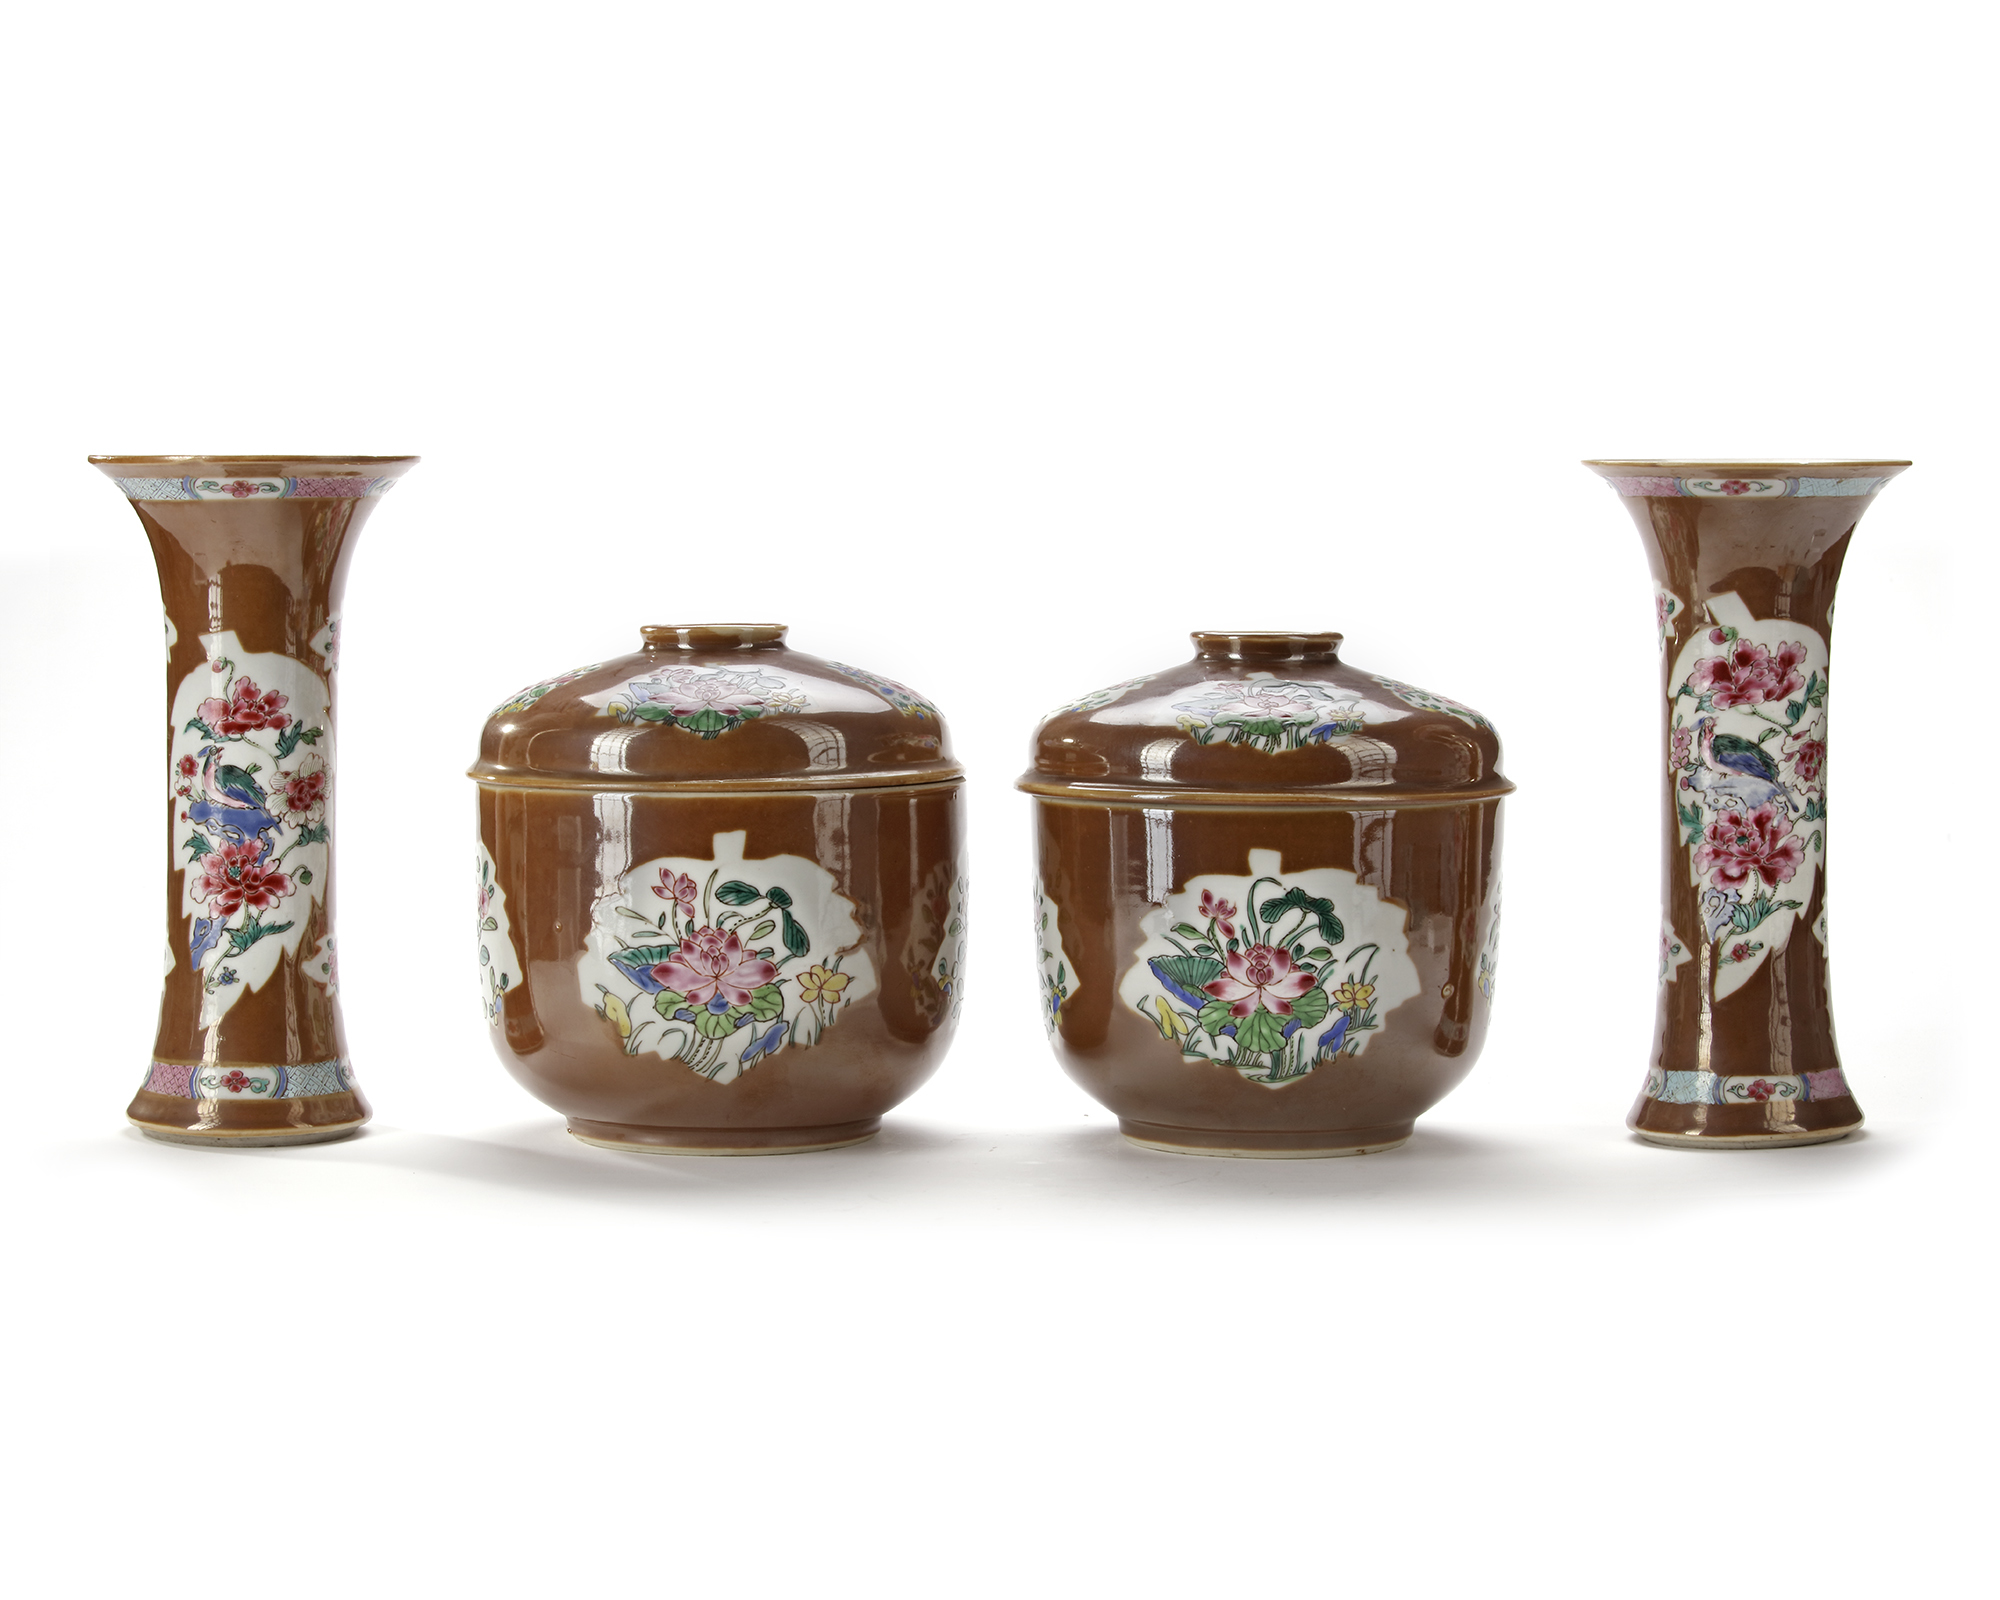 A PAIR OF CHINESE FAMILLE ROSE BEAKERS AND COVERED JARS, 18TH CENTURY